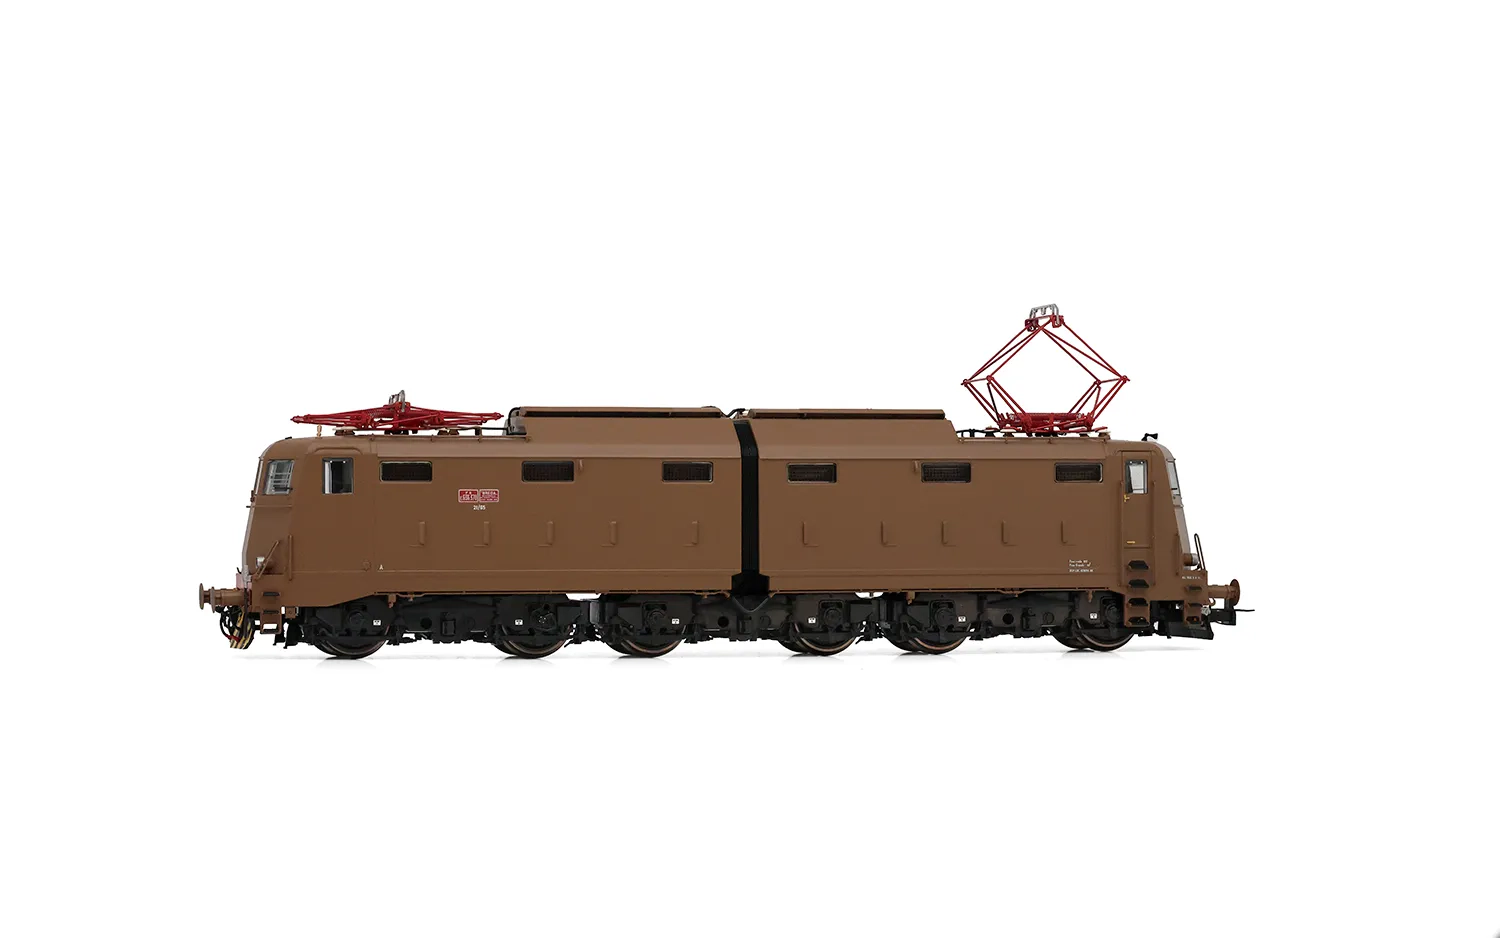 FS, 6-axle electric locomotive E.636 3rd series, isabella livery, without gutters, ep. V, with DCC sound decoder